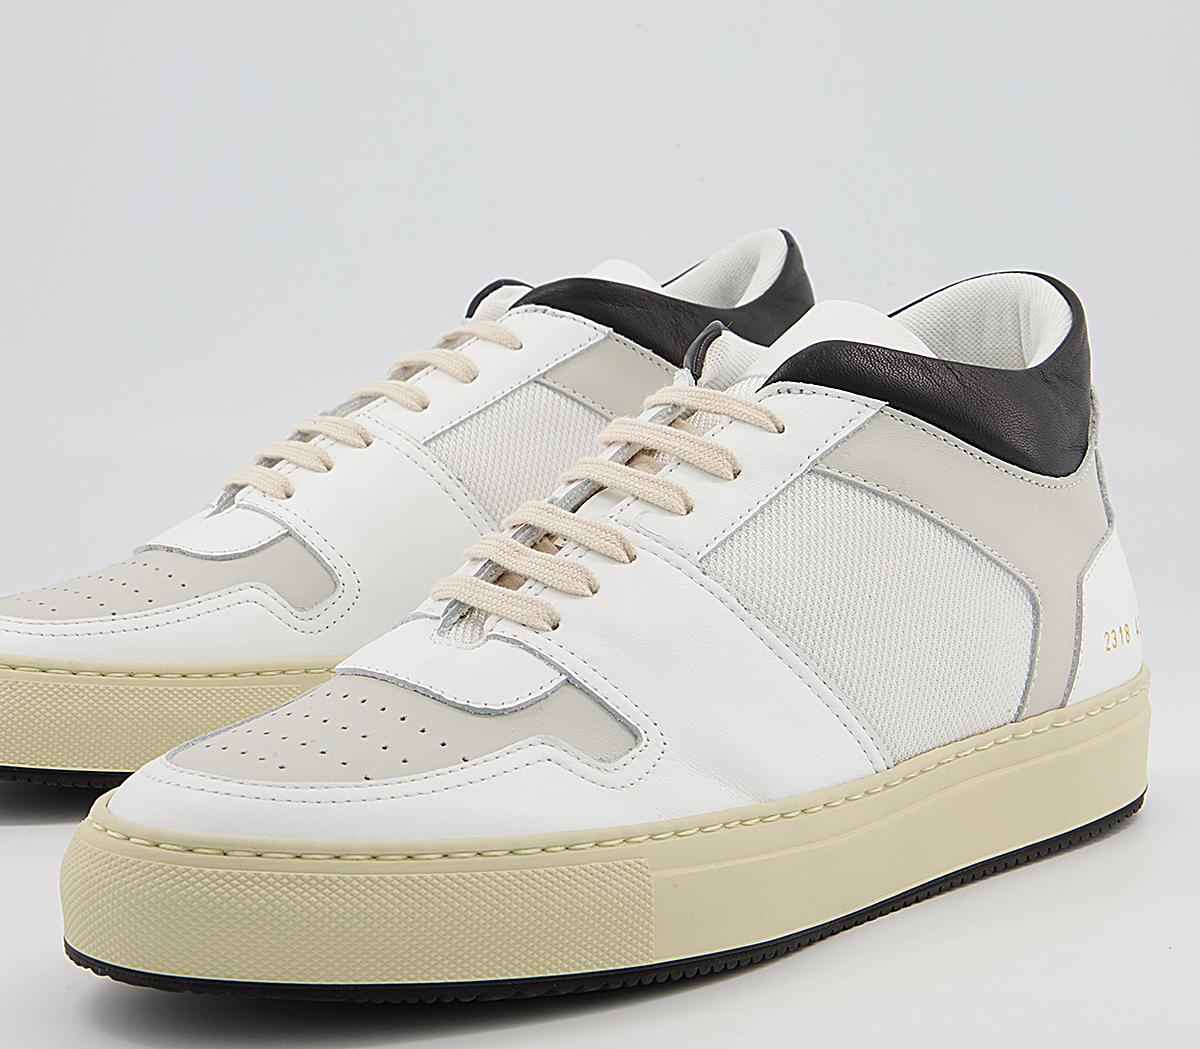 Common Projects Bball Low Decades Trainers White Black - His trainers